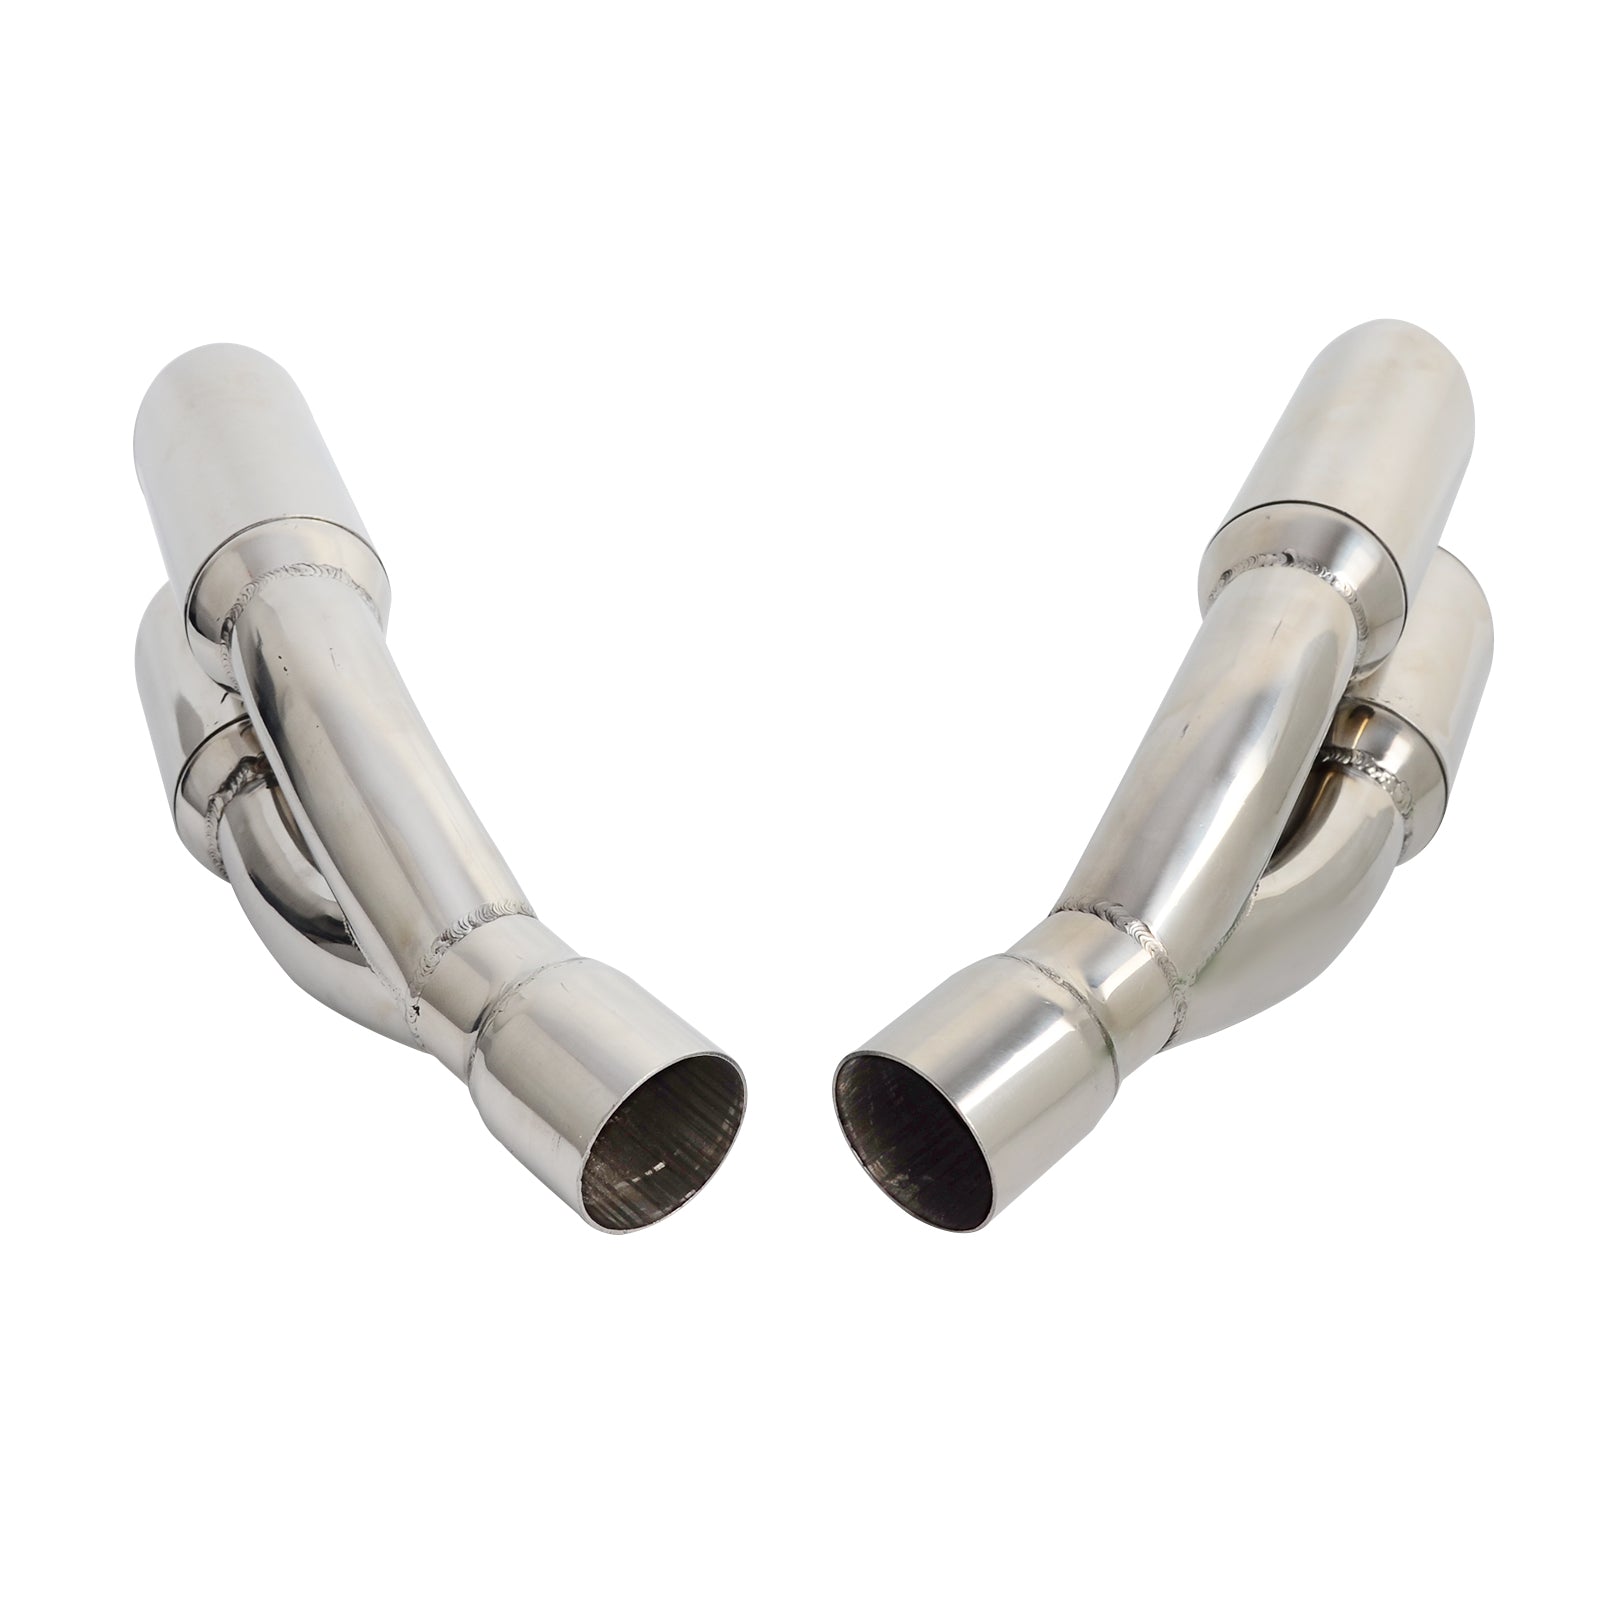 Dual Exhaust Muffler Vent Pipe Slip On 38-51mm Scooters Motorcycle Street Bikes